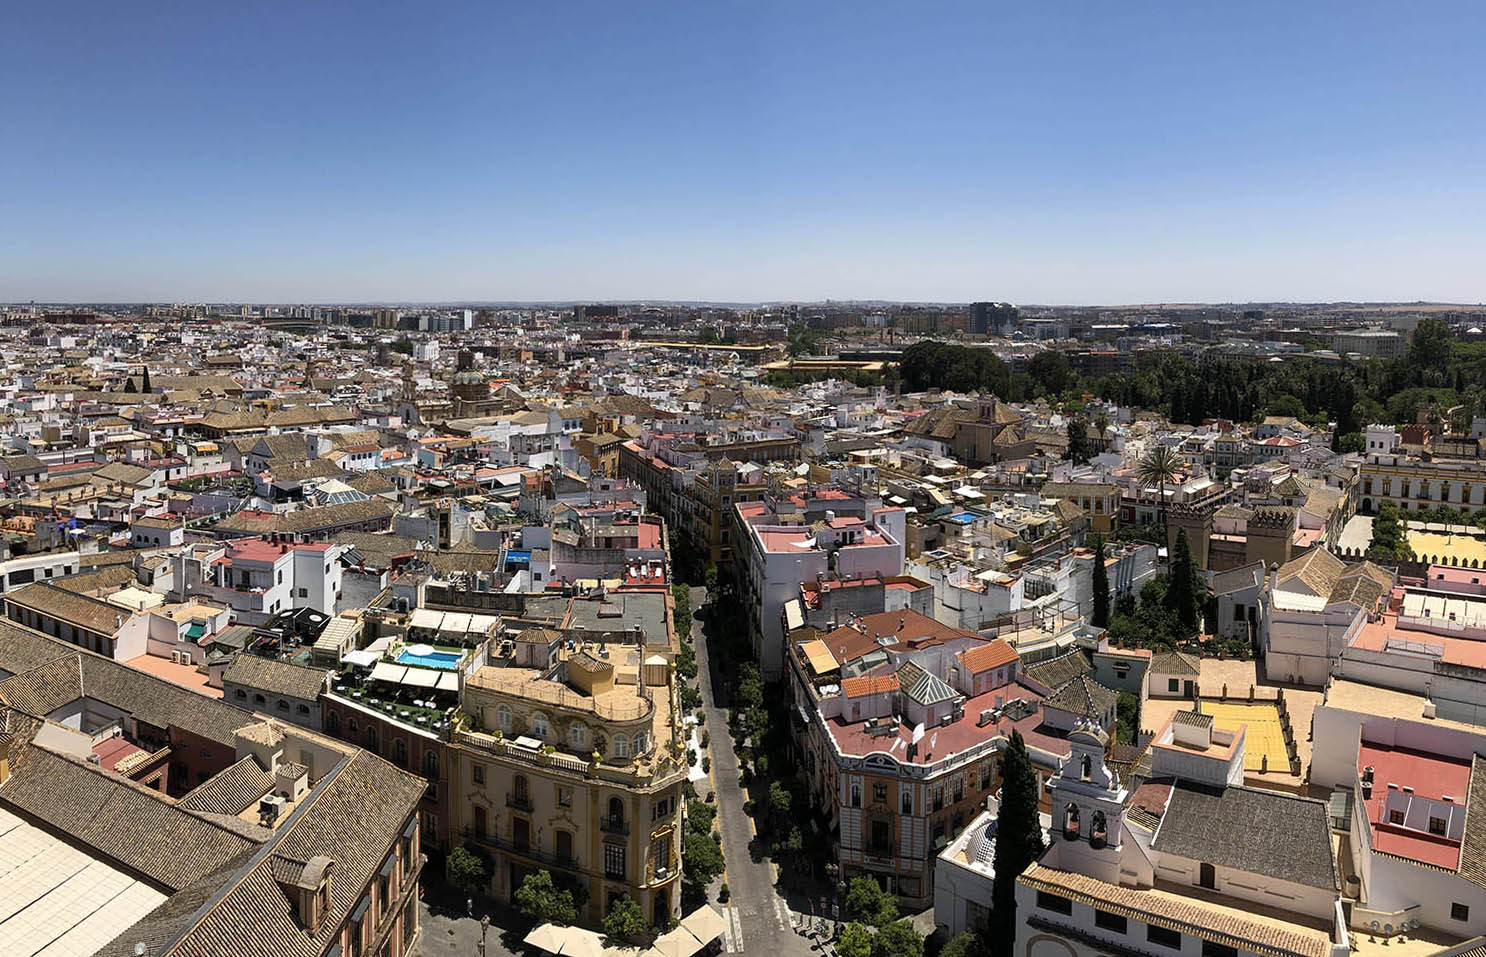 General view of Seville from La Giralda tower.